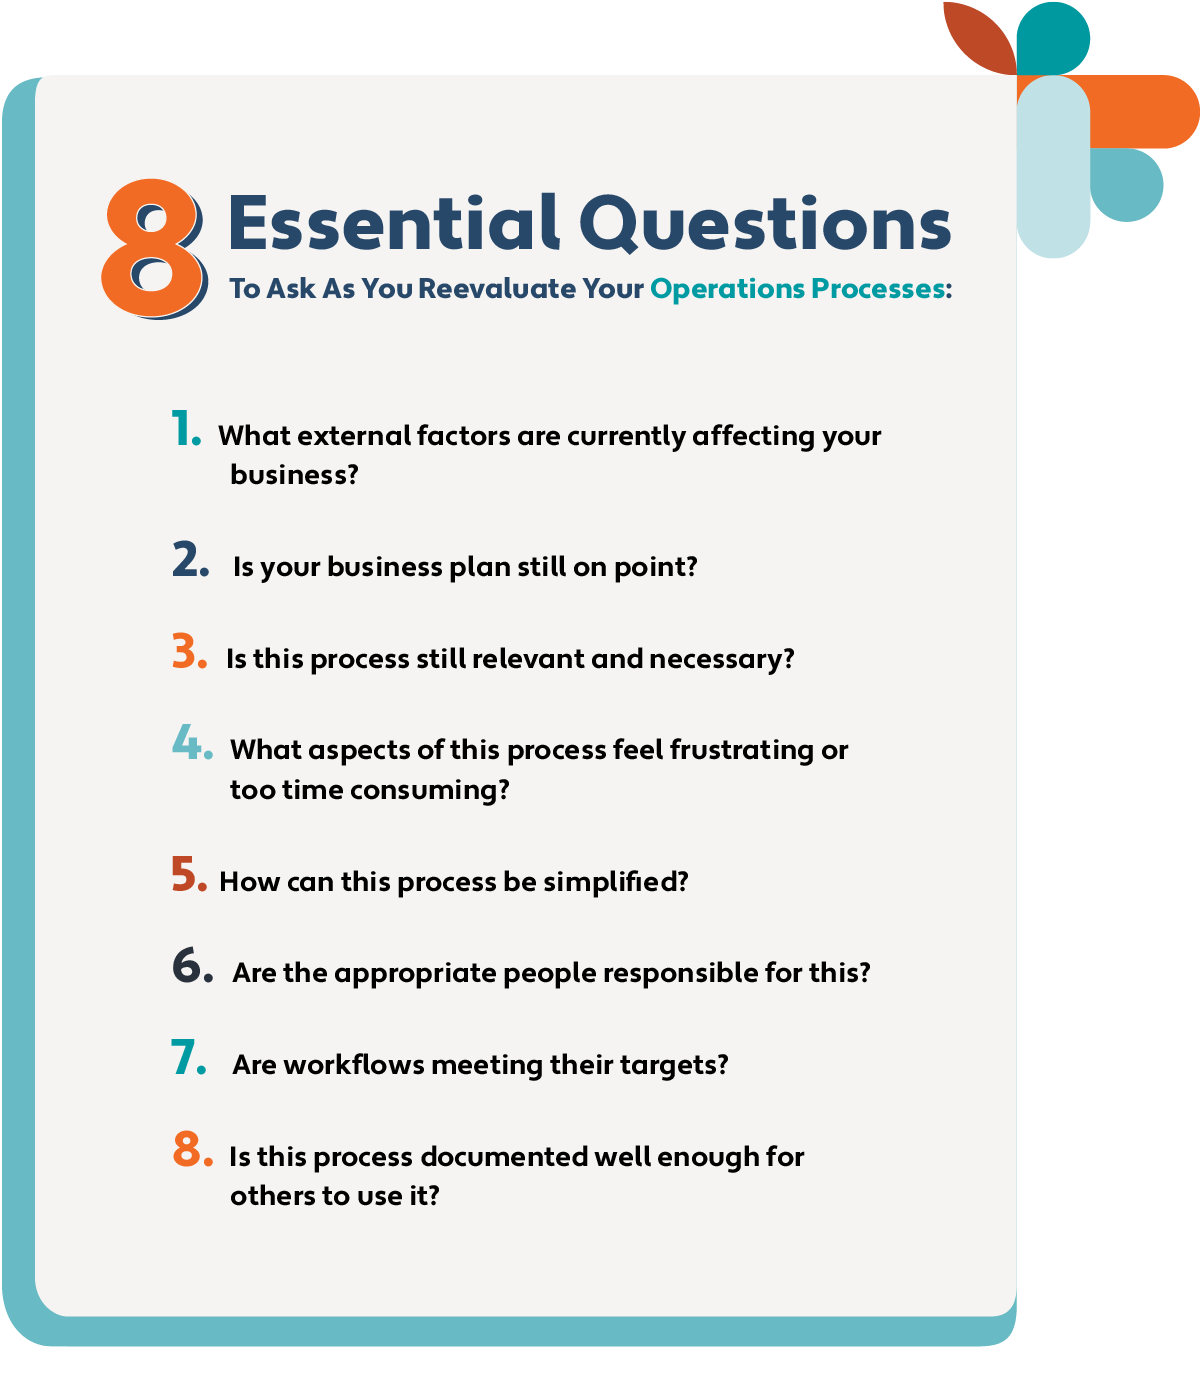 8 Essential Opereations Processes Questions-02